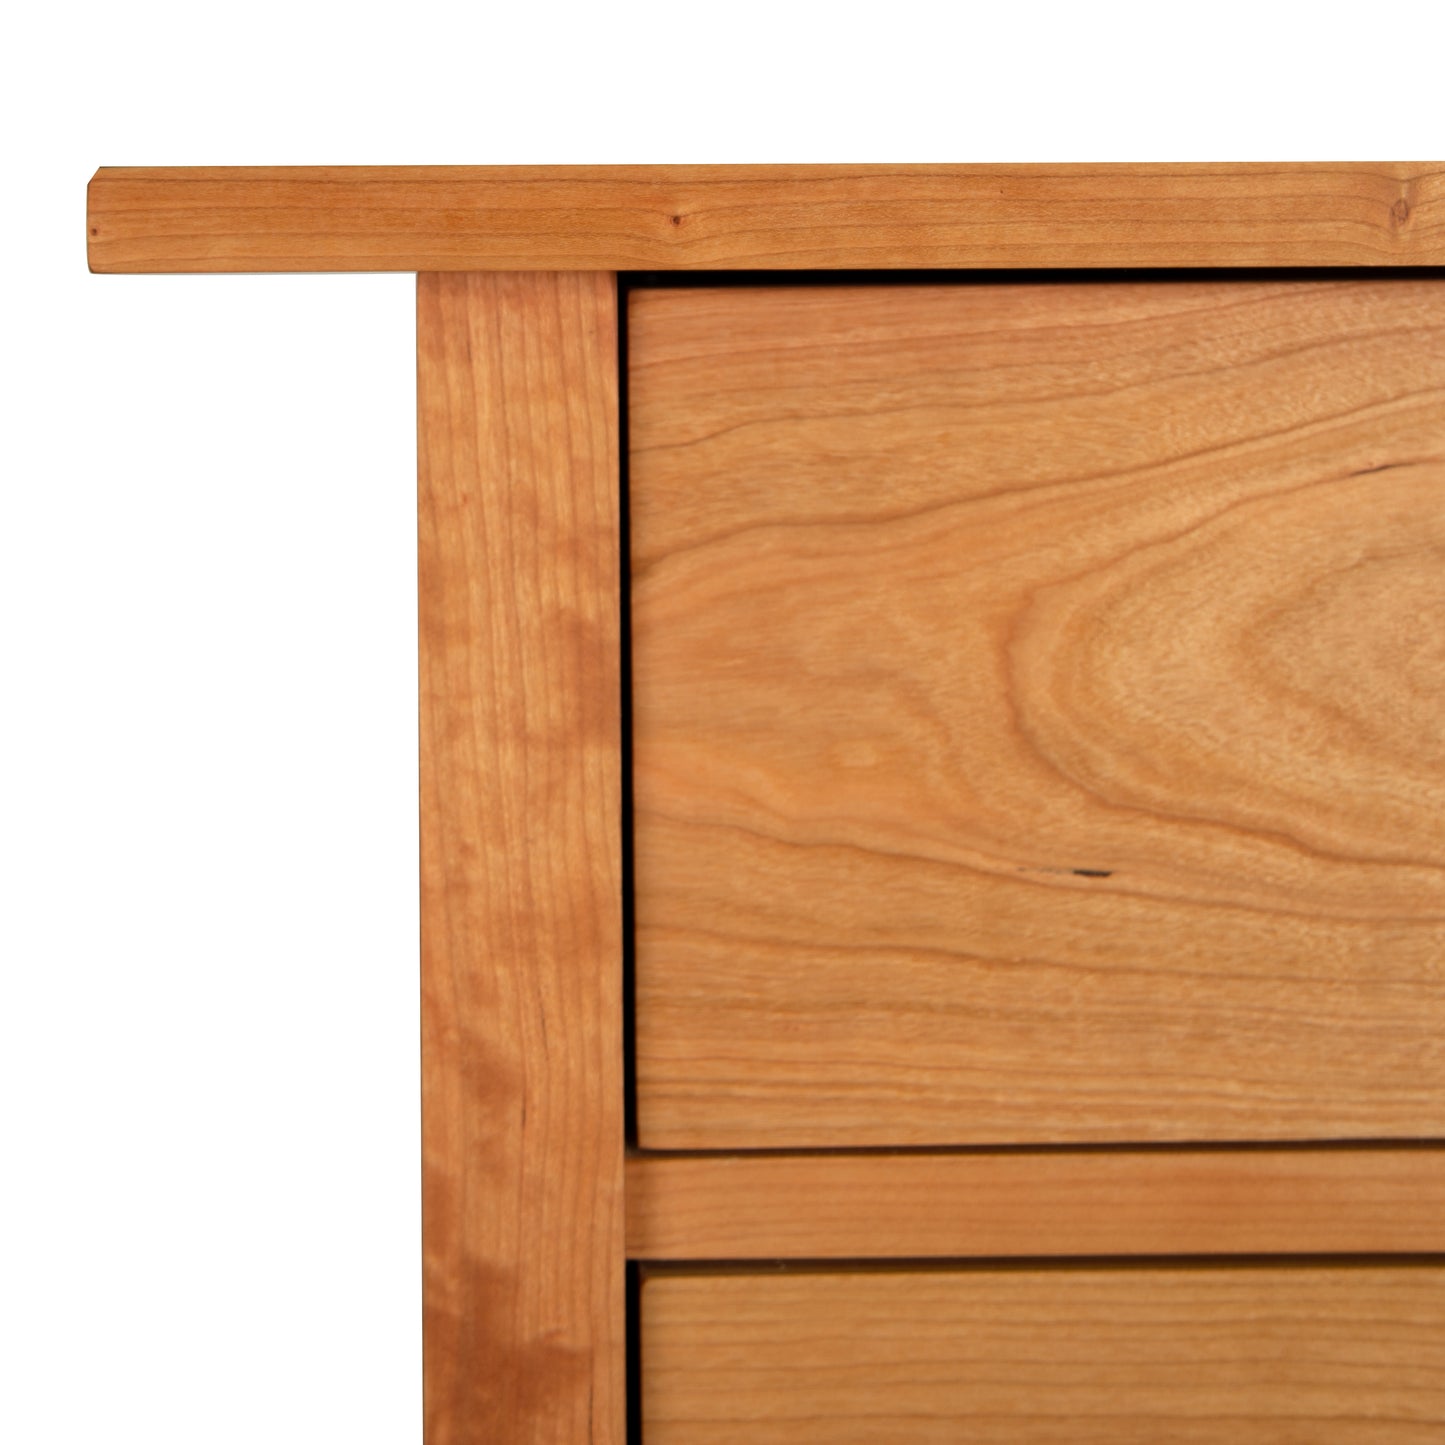 A close-up of a corner of a Burlington Shaker 6-Drawer Chest by Vermont Furniture Designs showing the tabletop and the patterns of the wood grain.